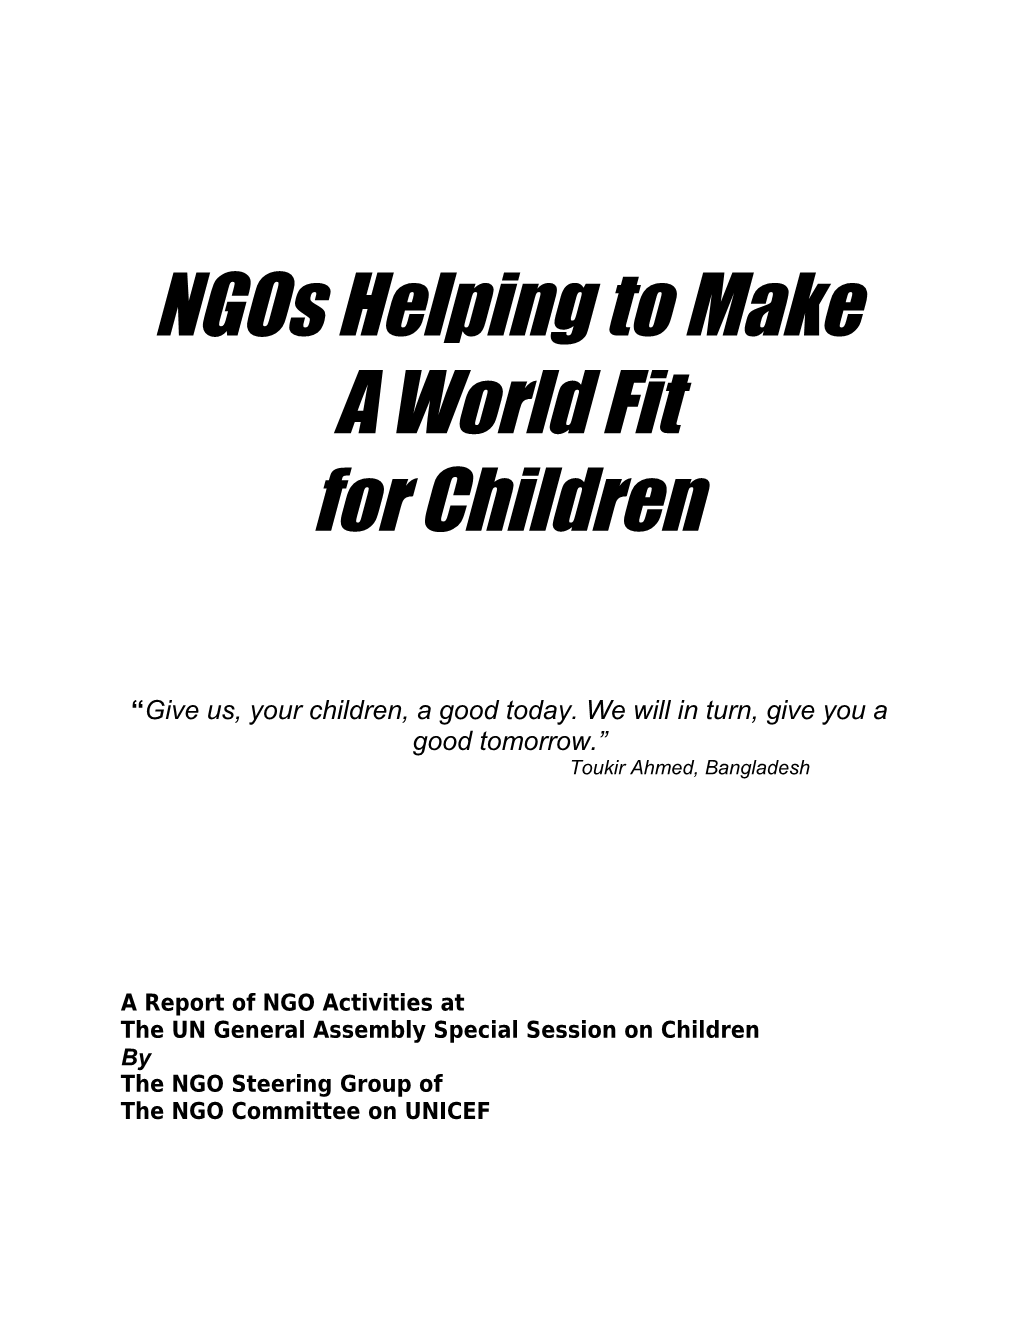 Ngos Helping to Make a World Fit for Children